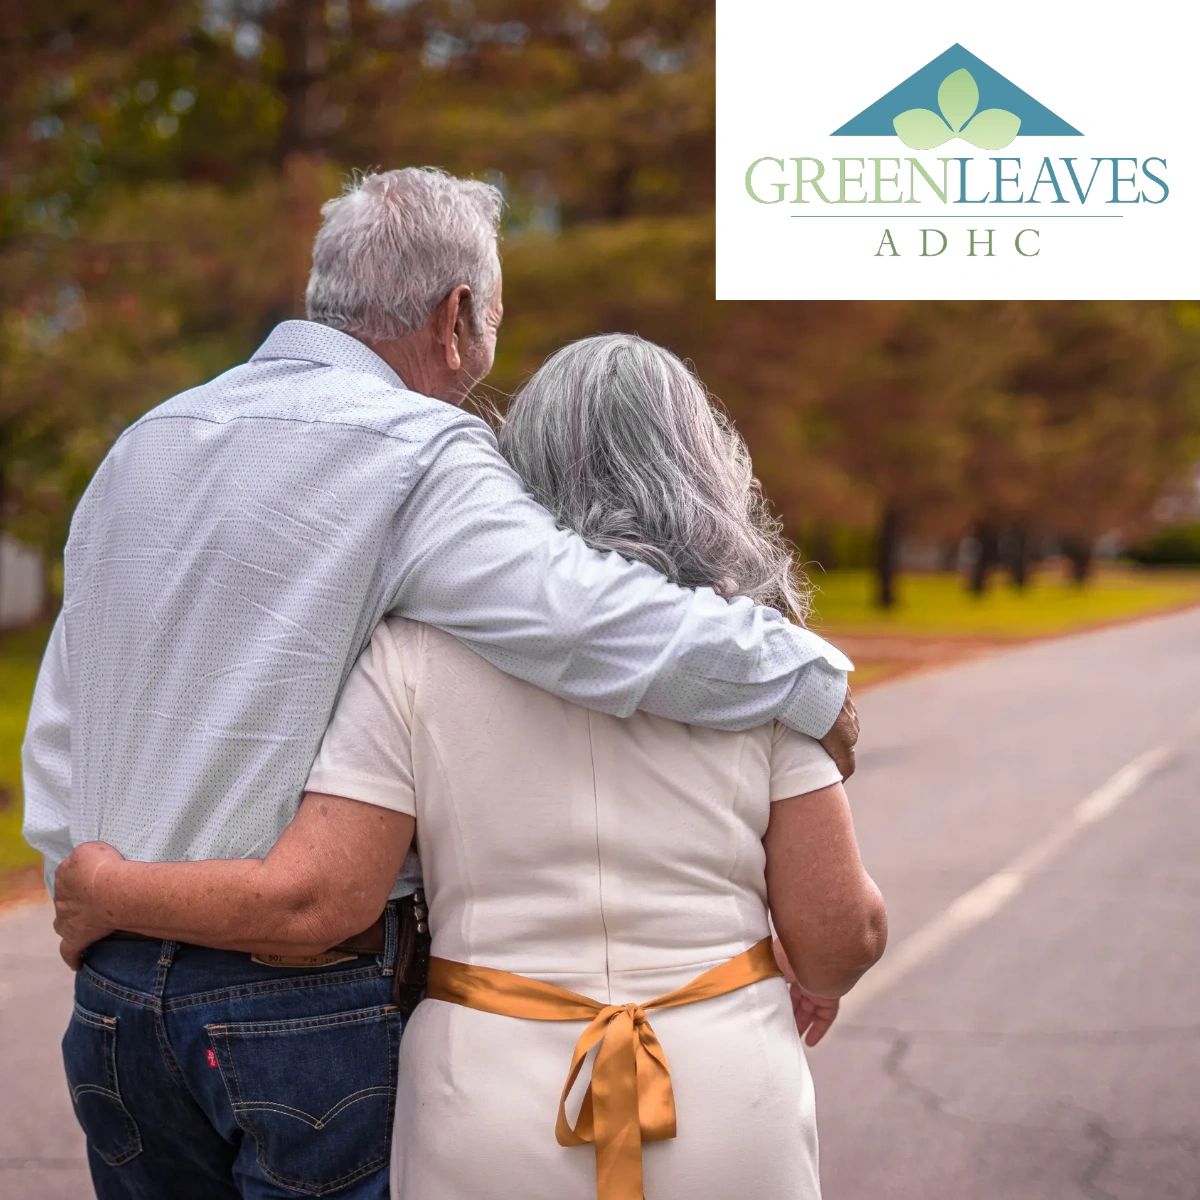 Your loved ones never have to walk the path of life alone when they have us to help support them. It's time for a brighter side of caring. It's time for compassion. It's time for Green Leaves. #GreenLeaves #GreenLeavesAdultDayHealthcare #AdultDayCare